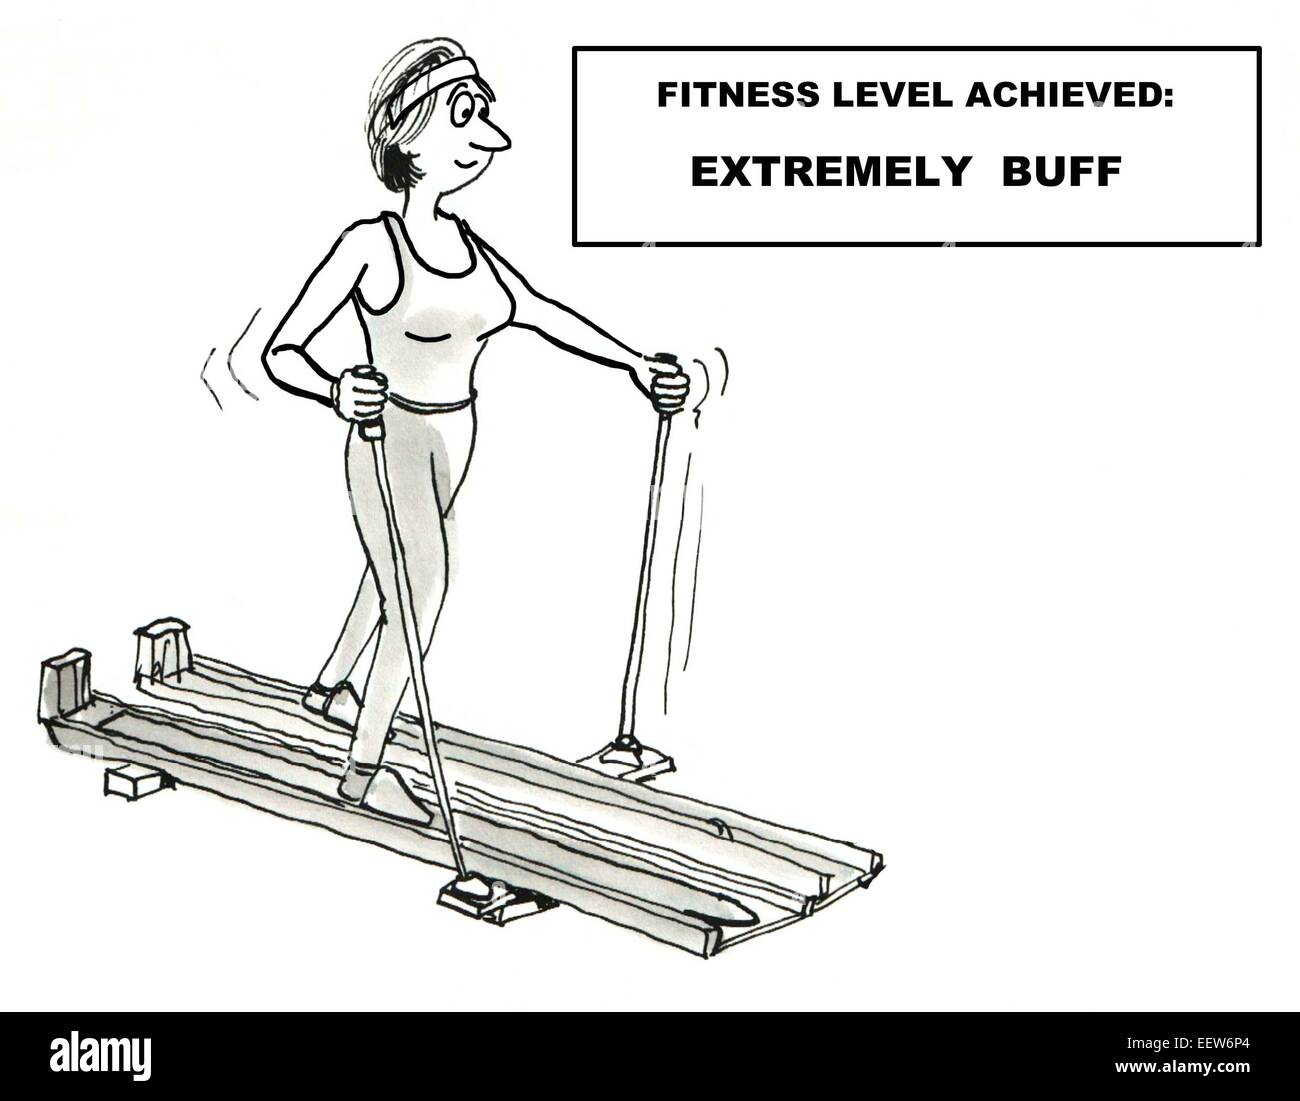 Cartoon of a woman exercising who it very fit and buff Stock Photo